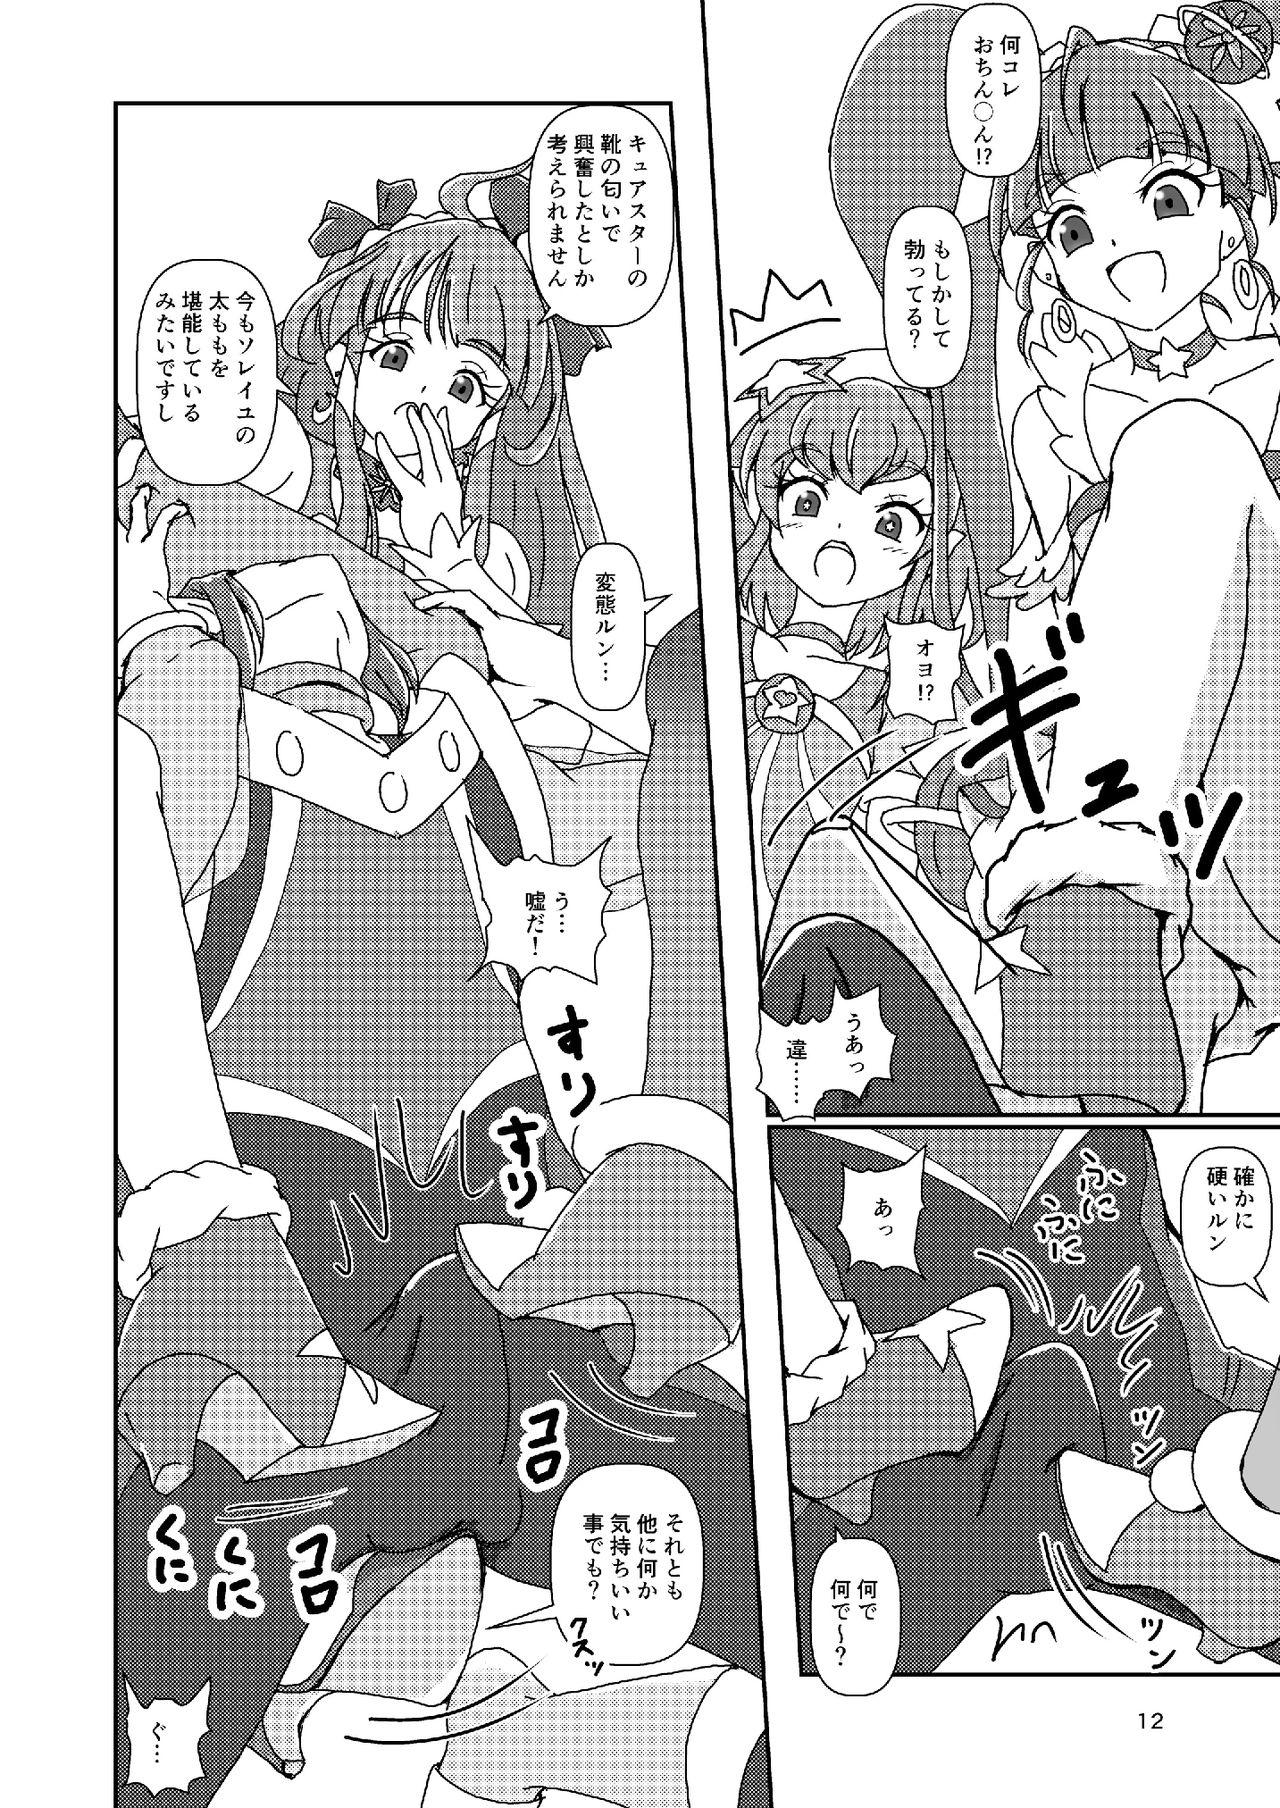 Penetration スター☆トゥインクルズリキュア - Star twinkle precure Whooty - Page 11